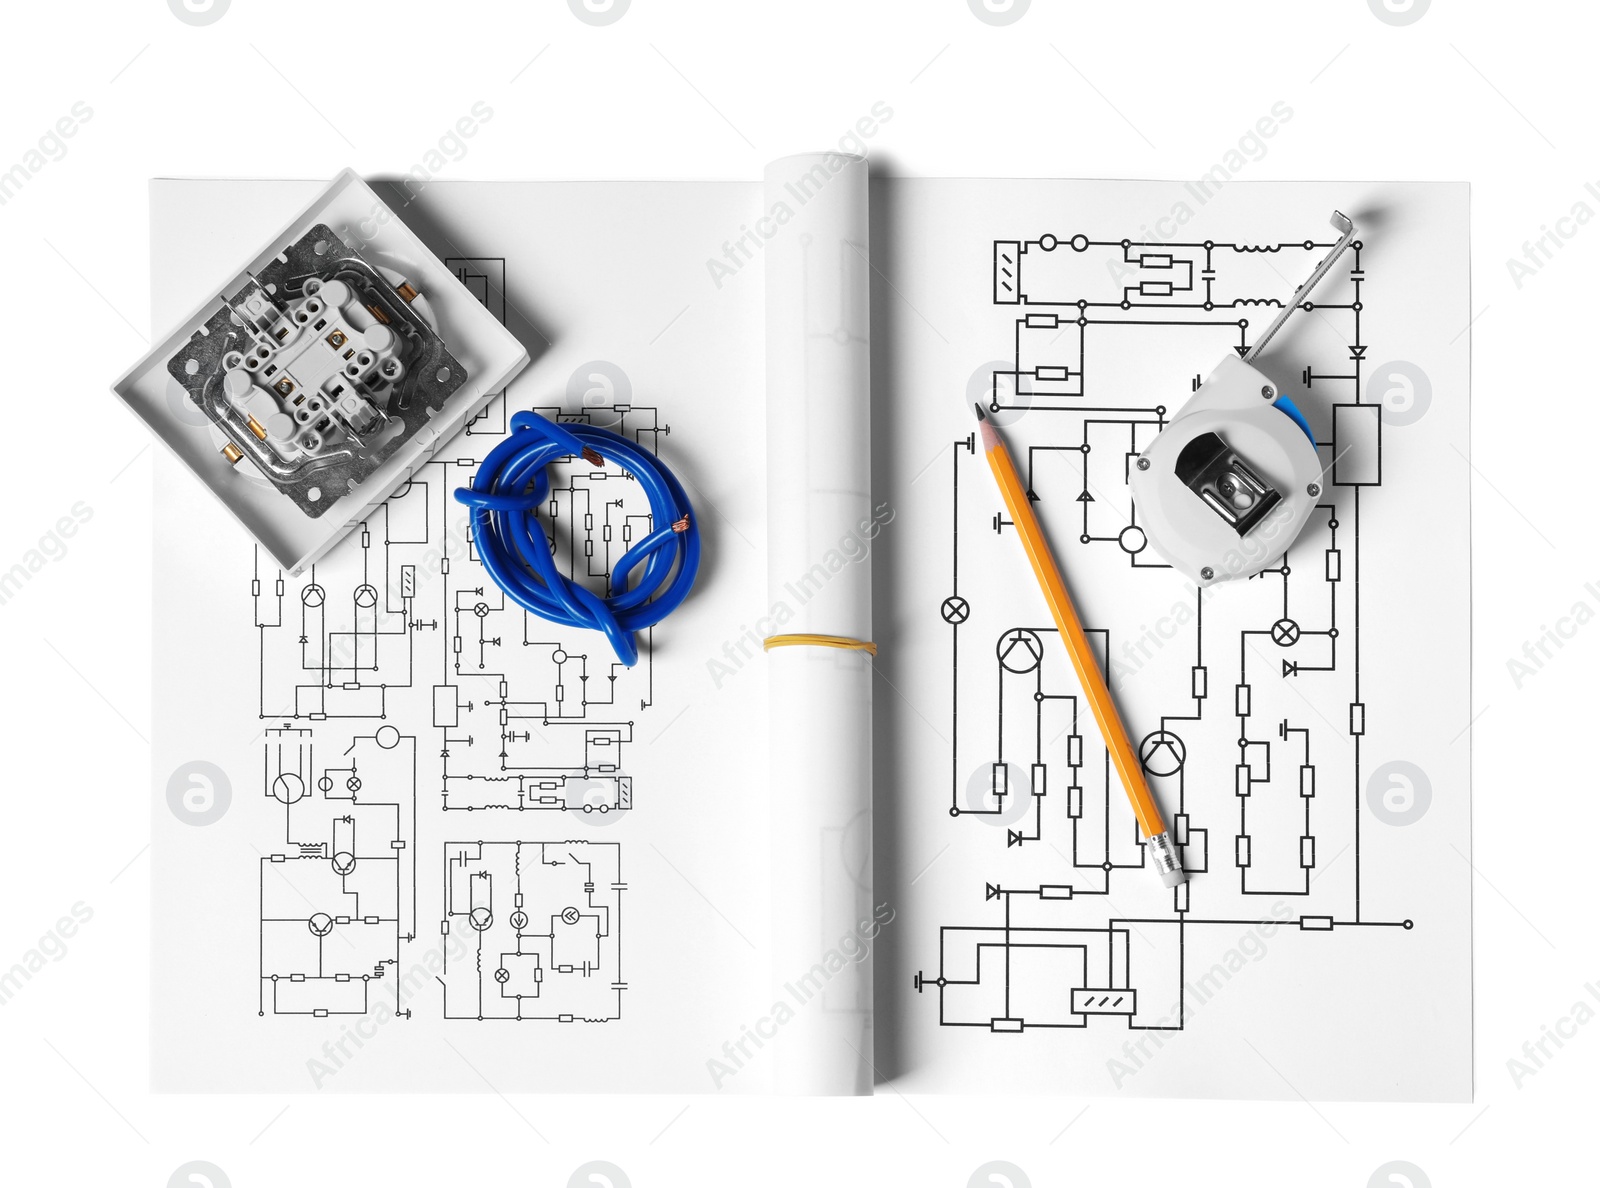 Photo of Wiring diagrams, wires, disassembled light switch, tape measure and pencil isolated on white, top view